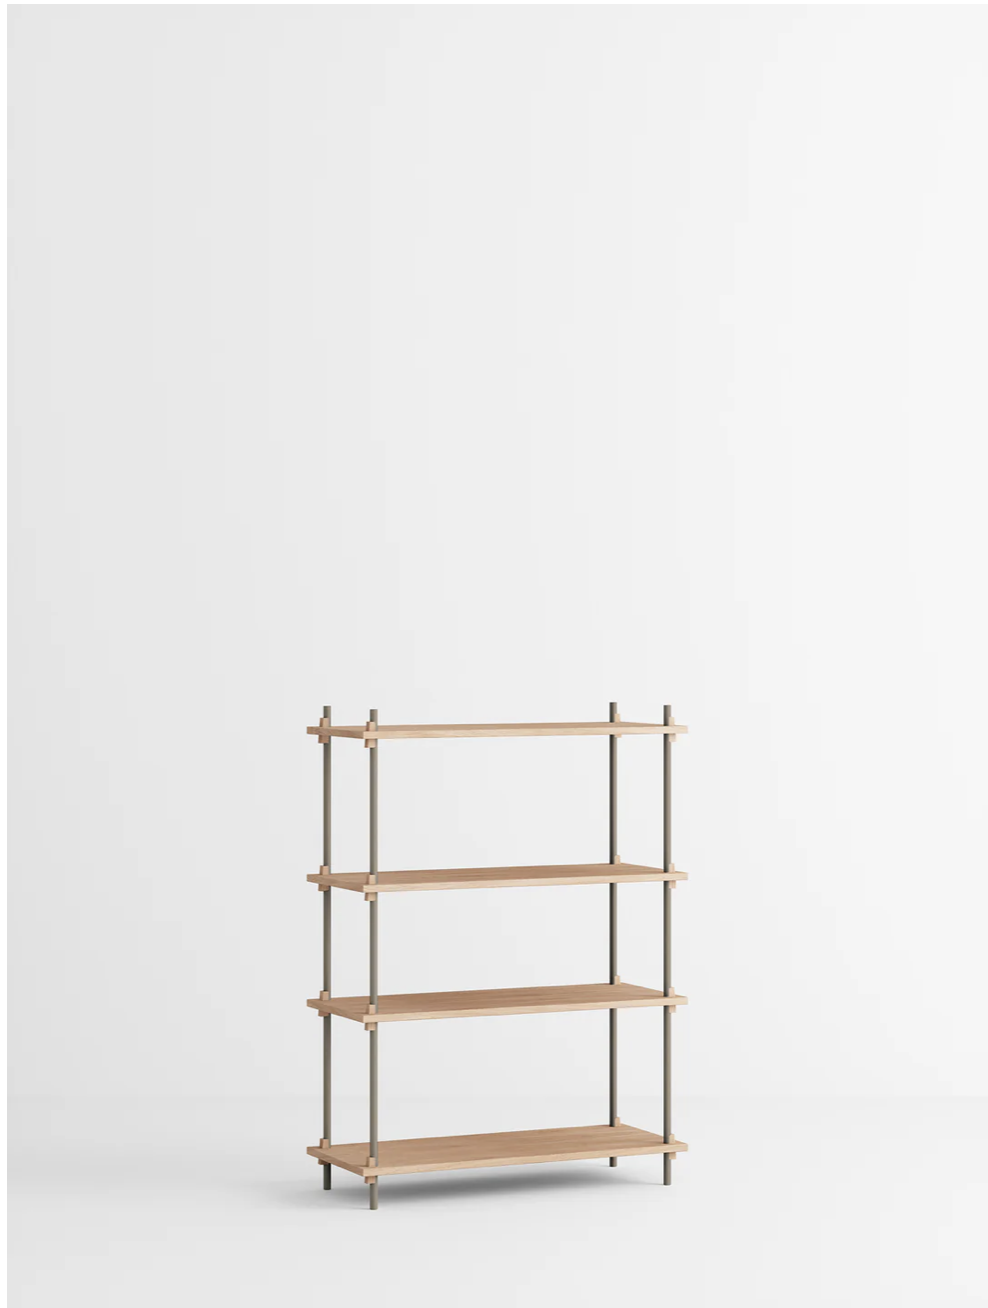 Shelving System – s.115.1.A